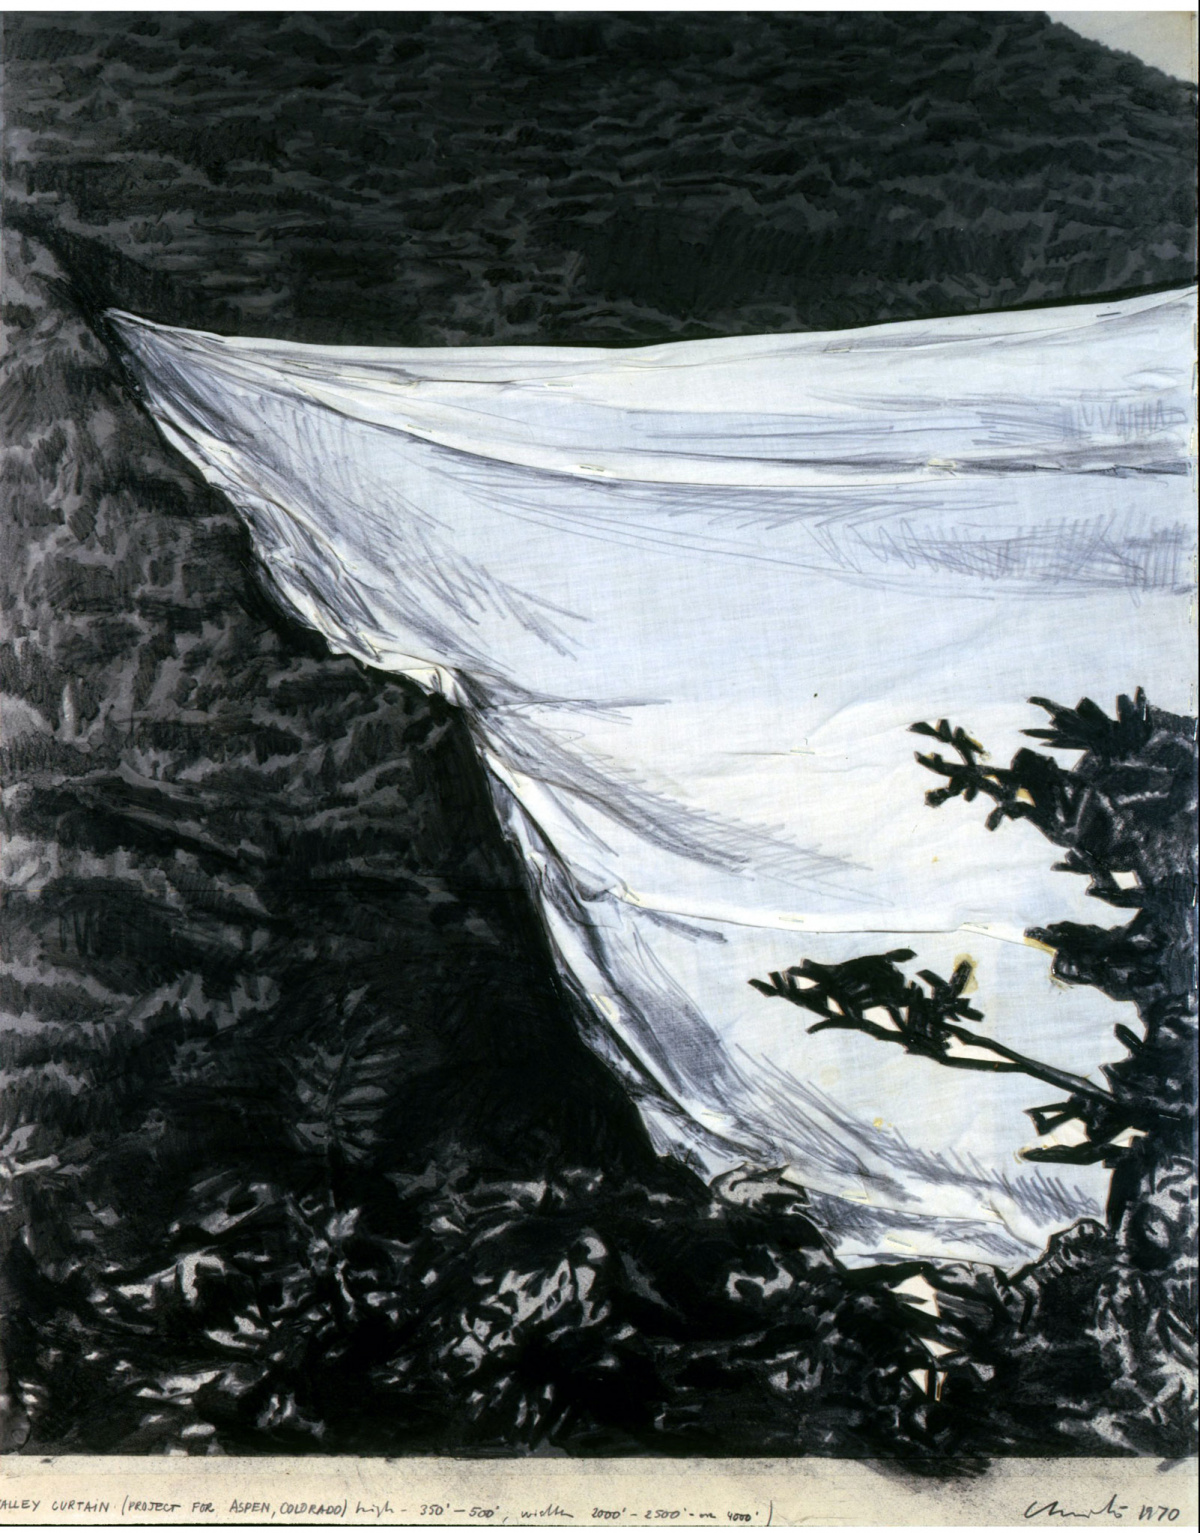 CHRISTO-AND-JEANNE-CLAUDE-Valley-Curtain-(Project-for-Aspen,-Colorado),-1970-Pencil,-fabric,-photostat-and-charcoal-28-x-22-in-(CJC-029)